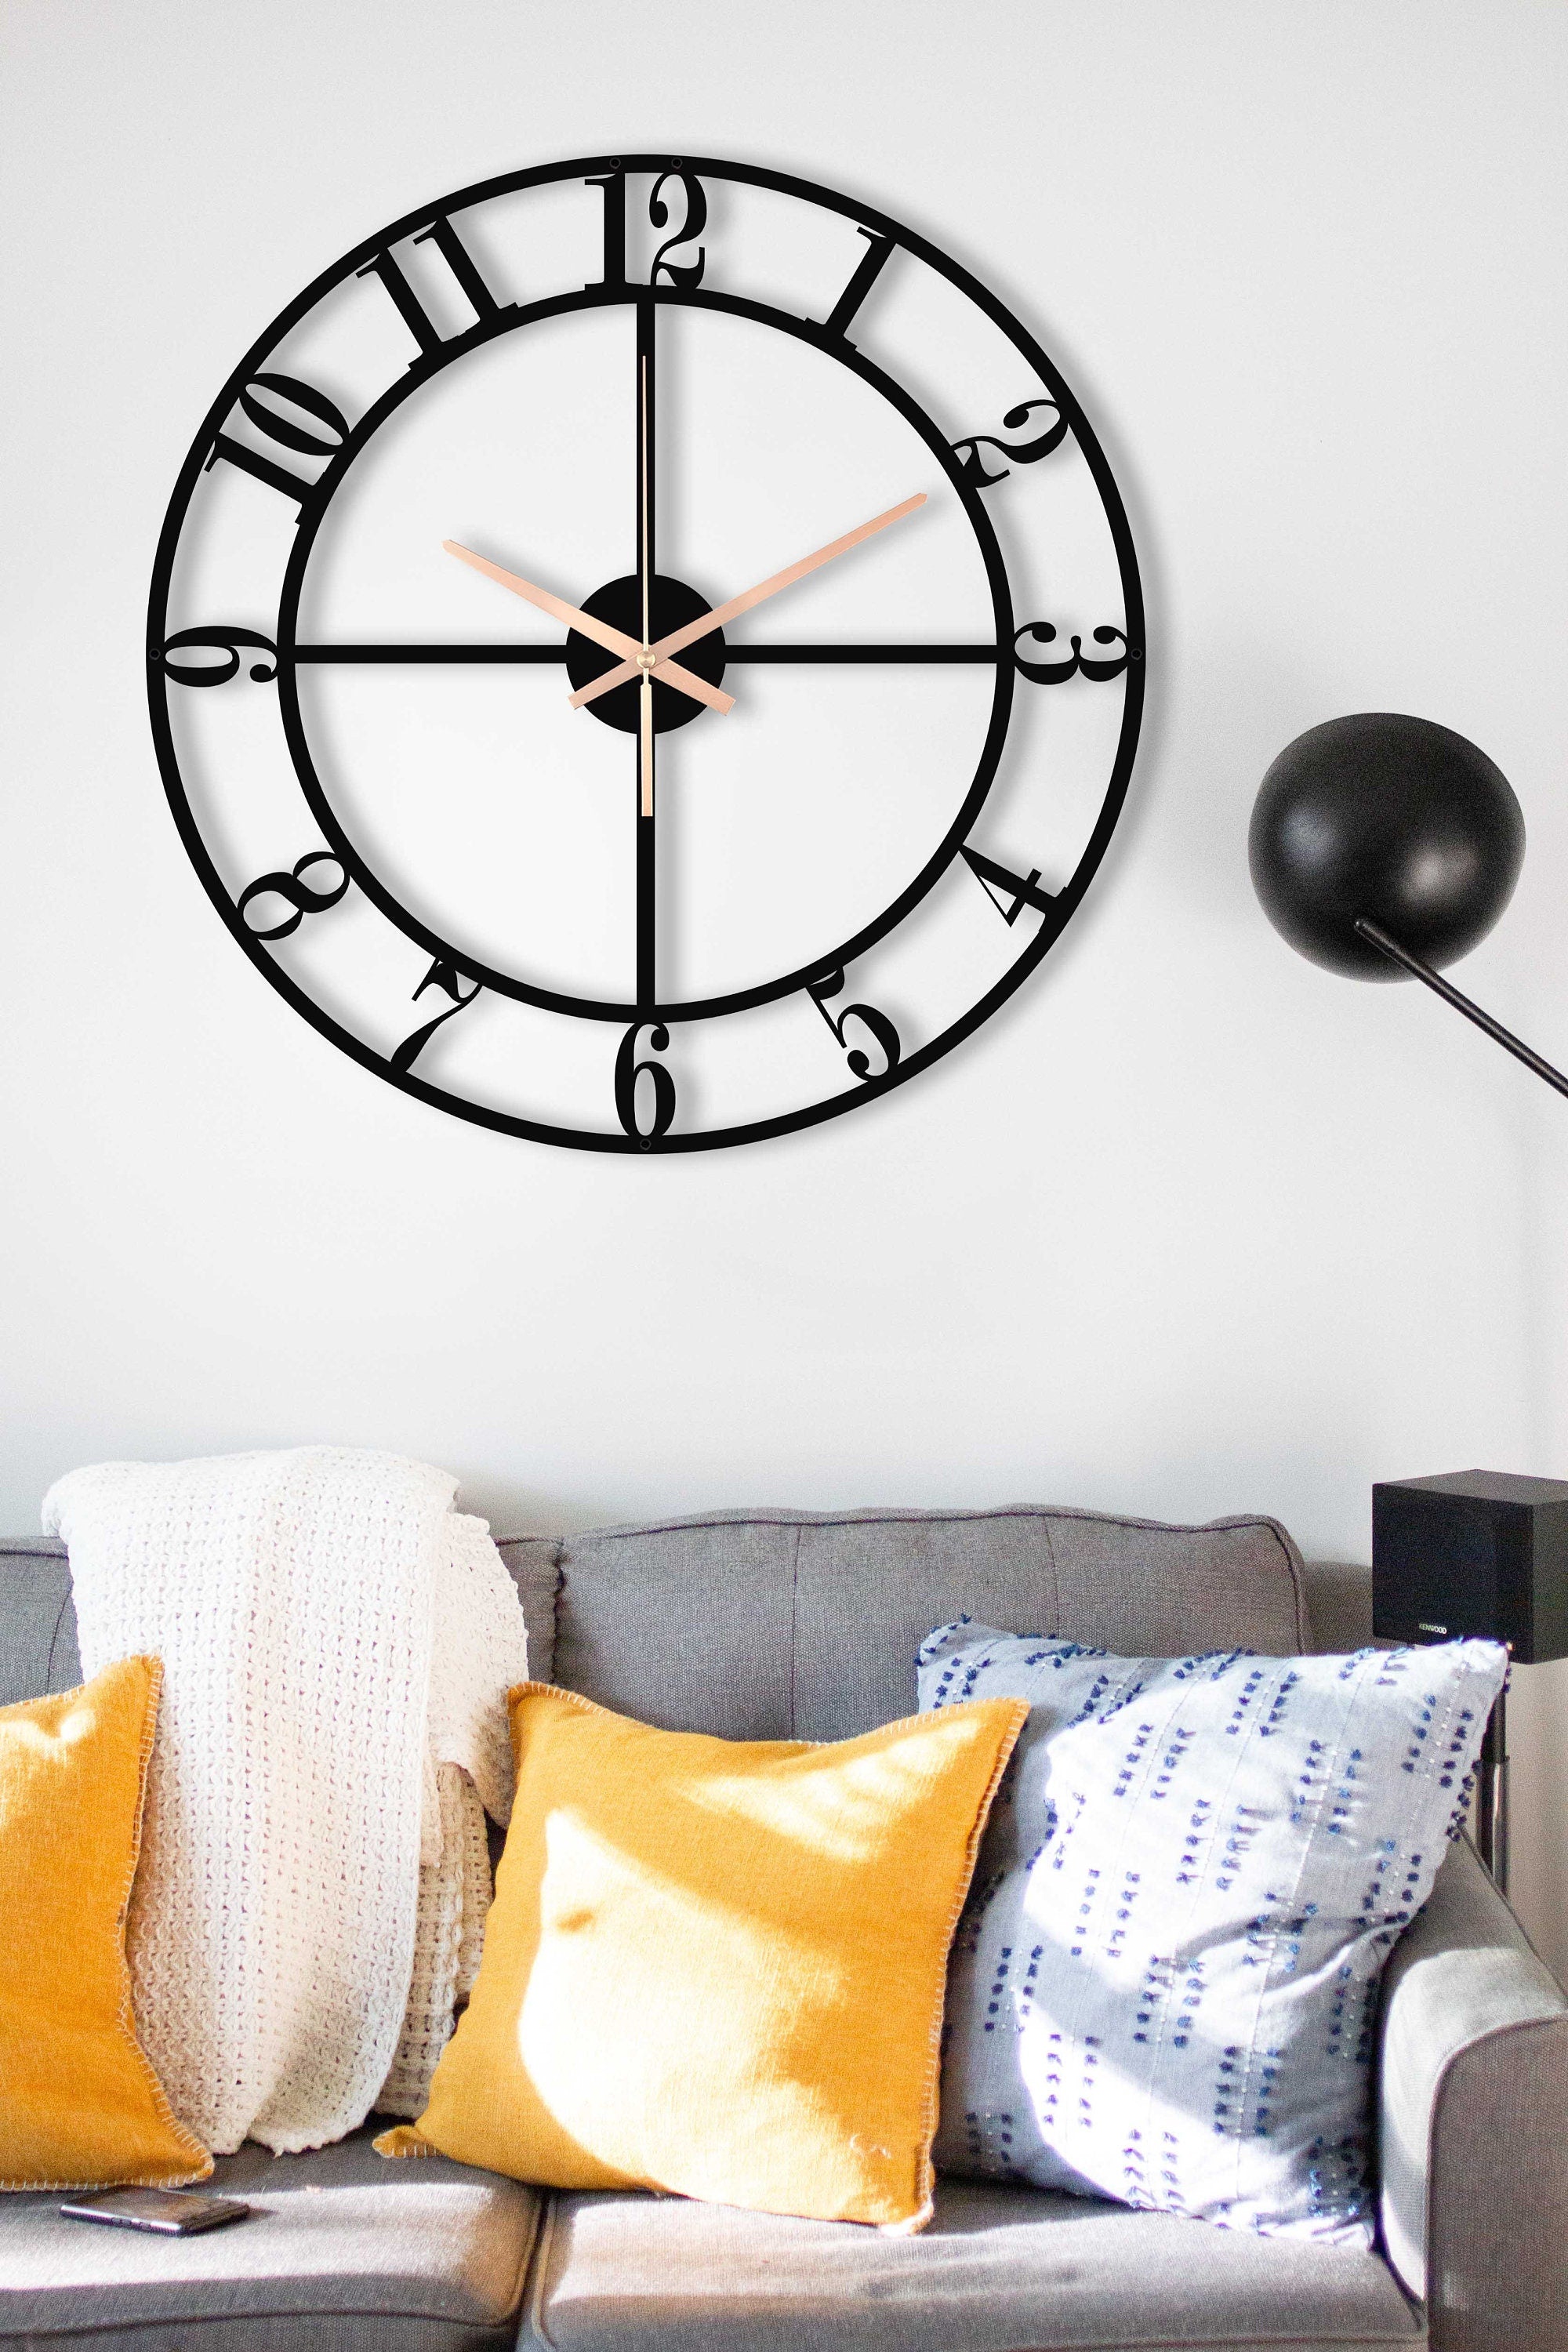 Silent Wall Clock, Unique Wall Clock, Metal Office Wall Hanging Clock, Decorative Clock, Outdoor Clock With Numbers, Laser Cut Clock